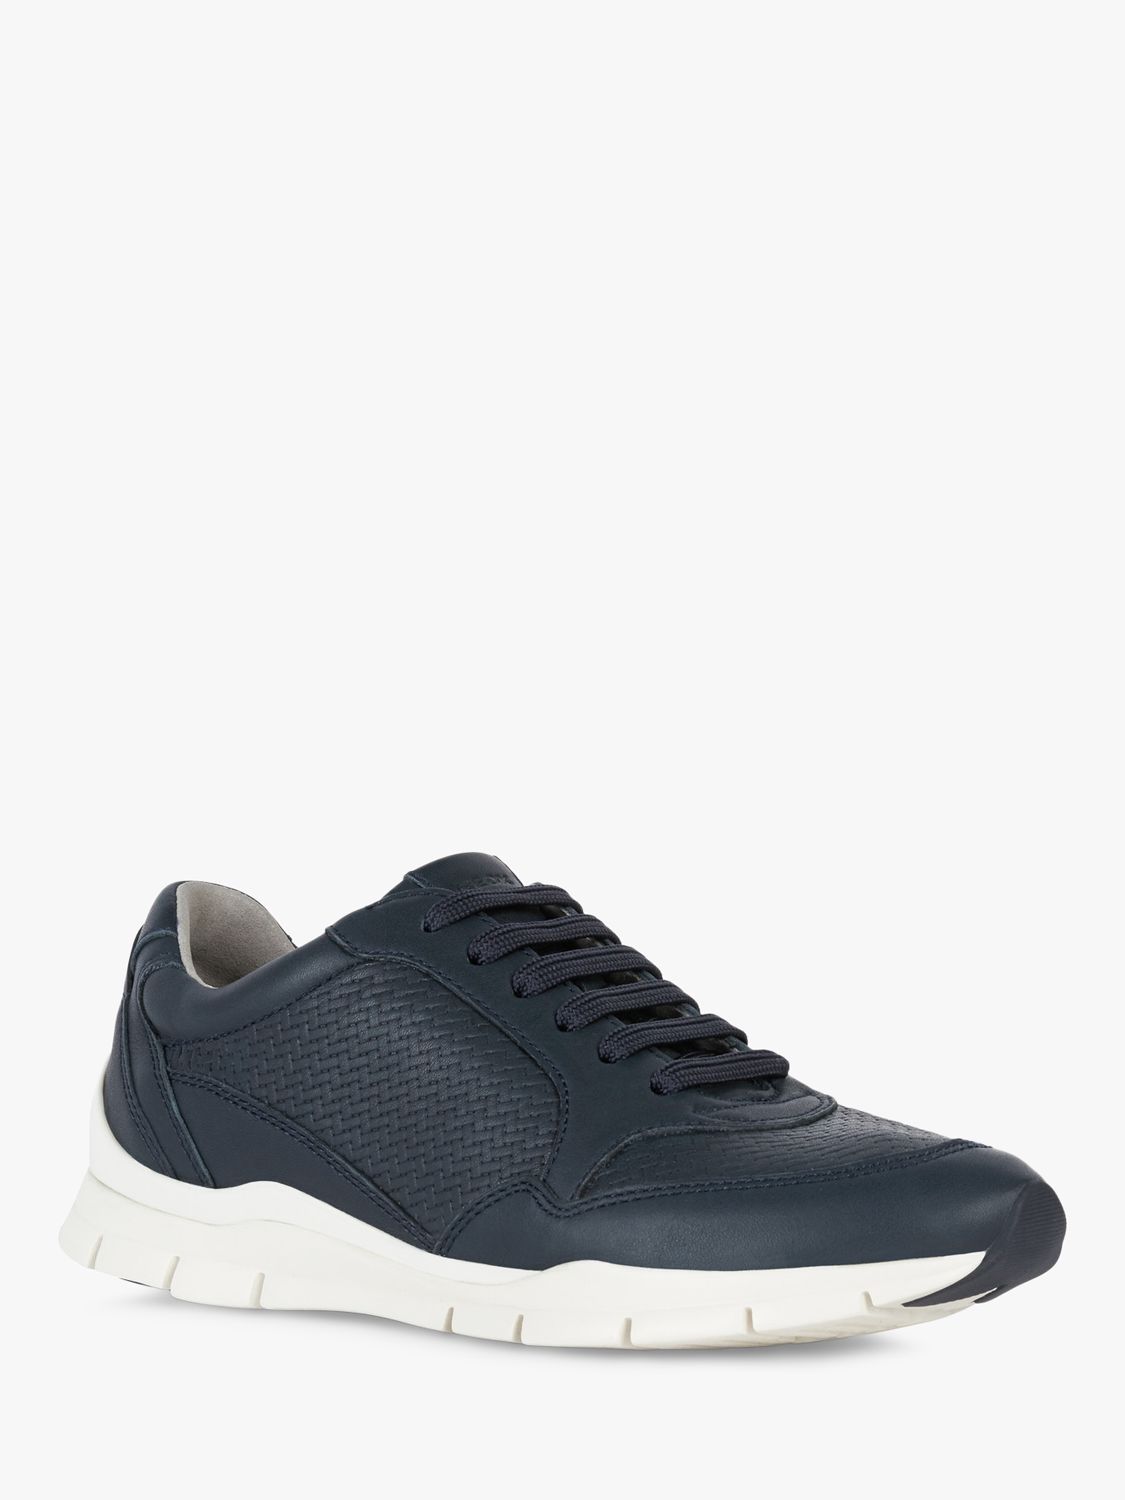 Geox Sukie Leather Trainers, Navy at John Lewis & Partners